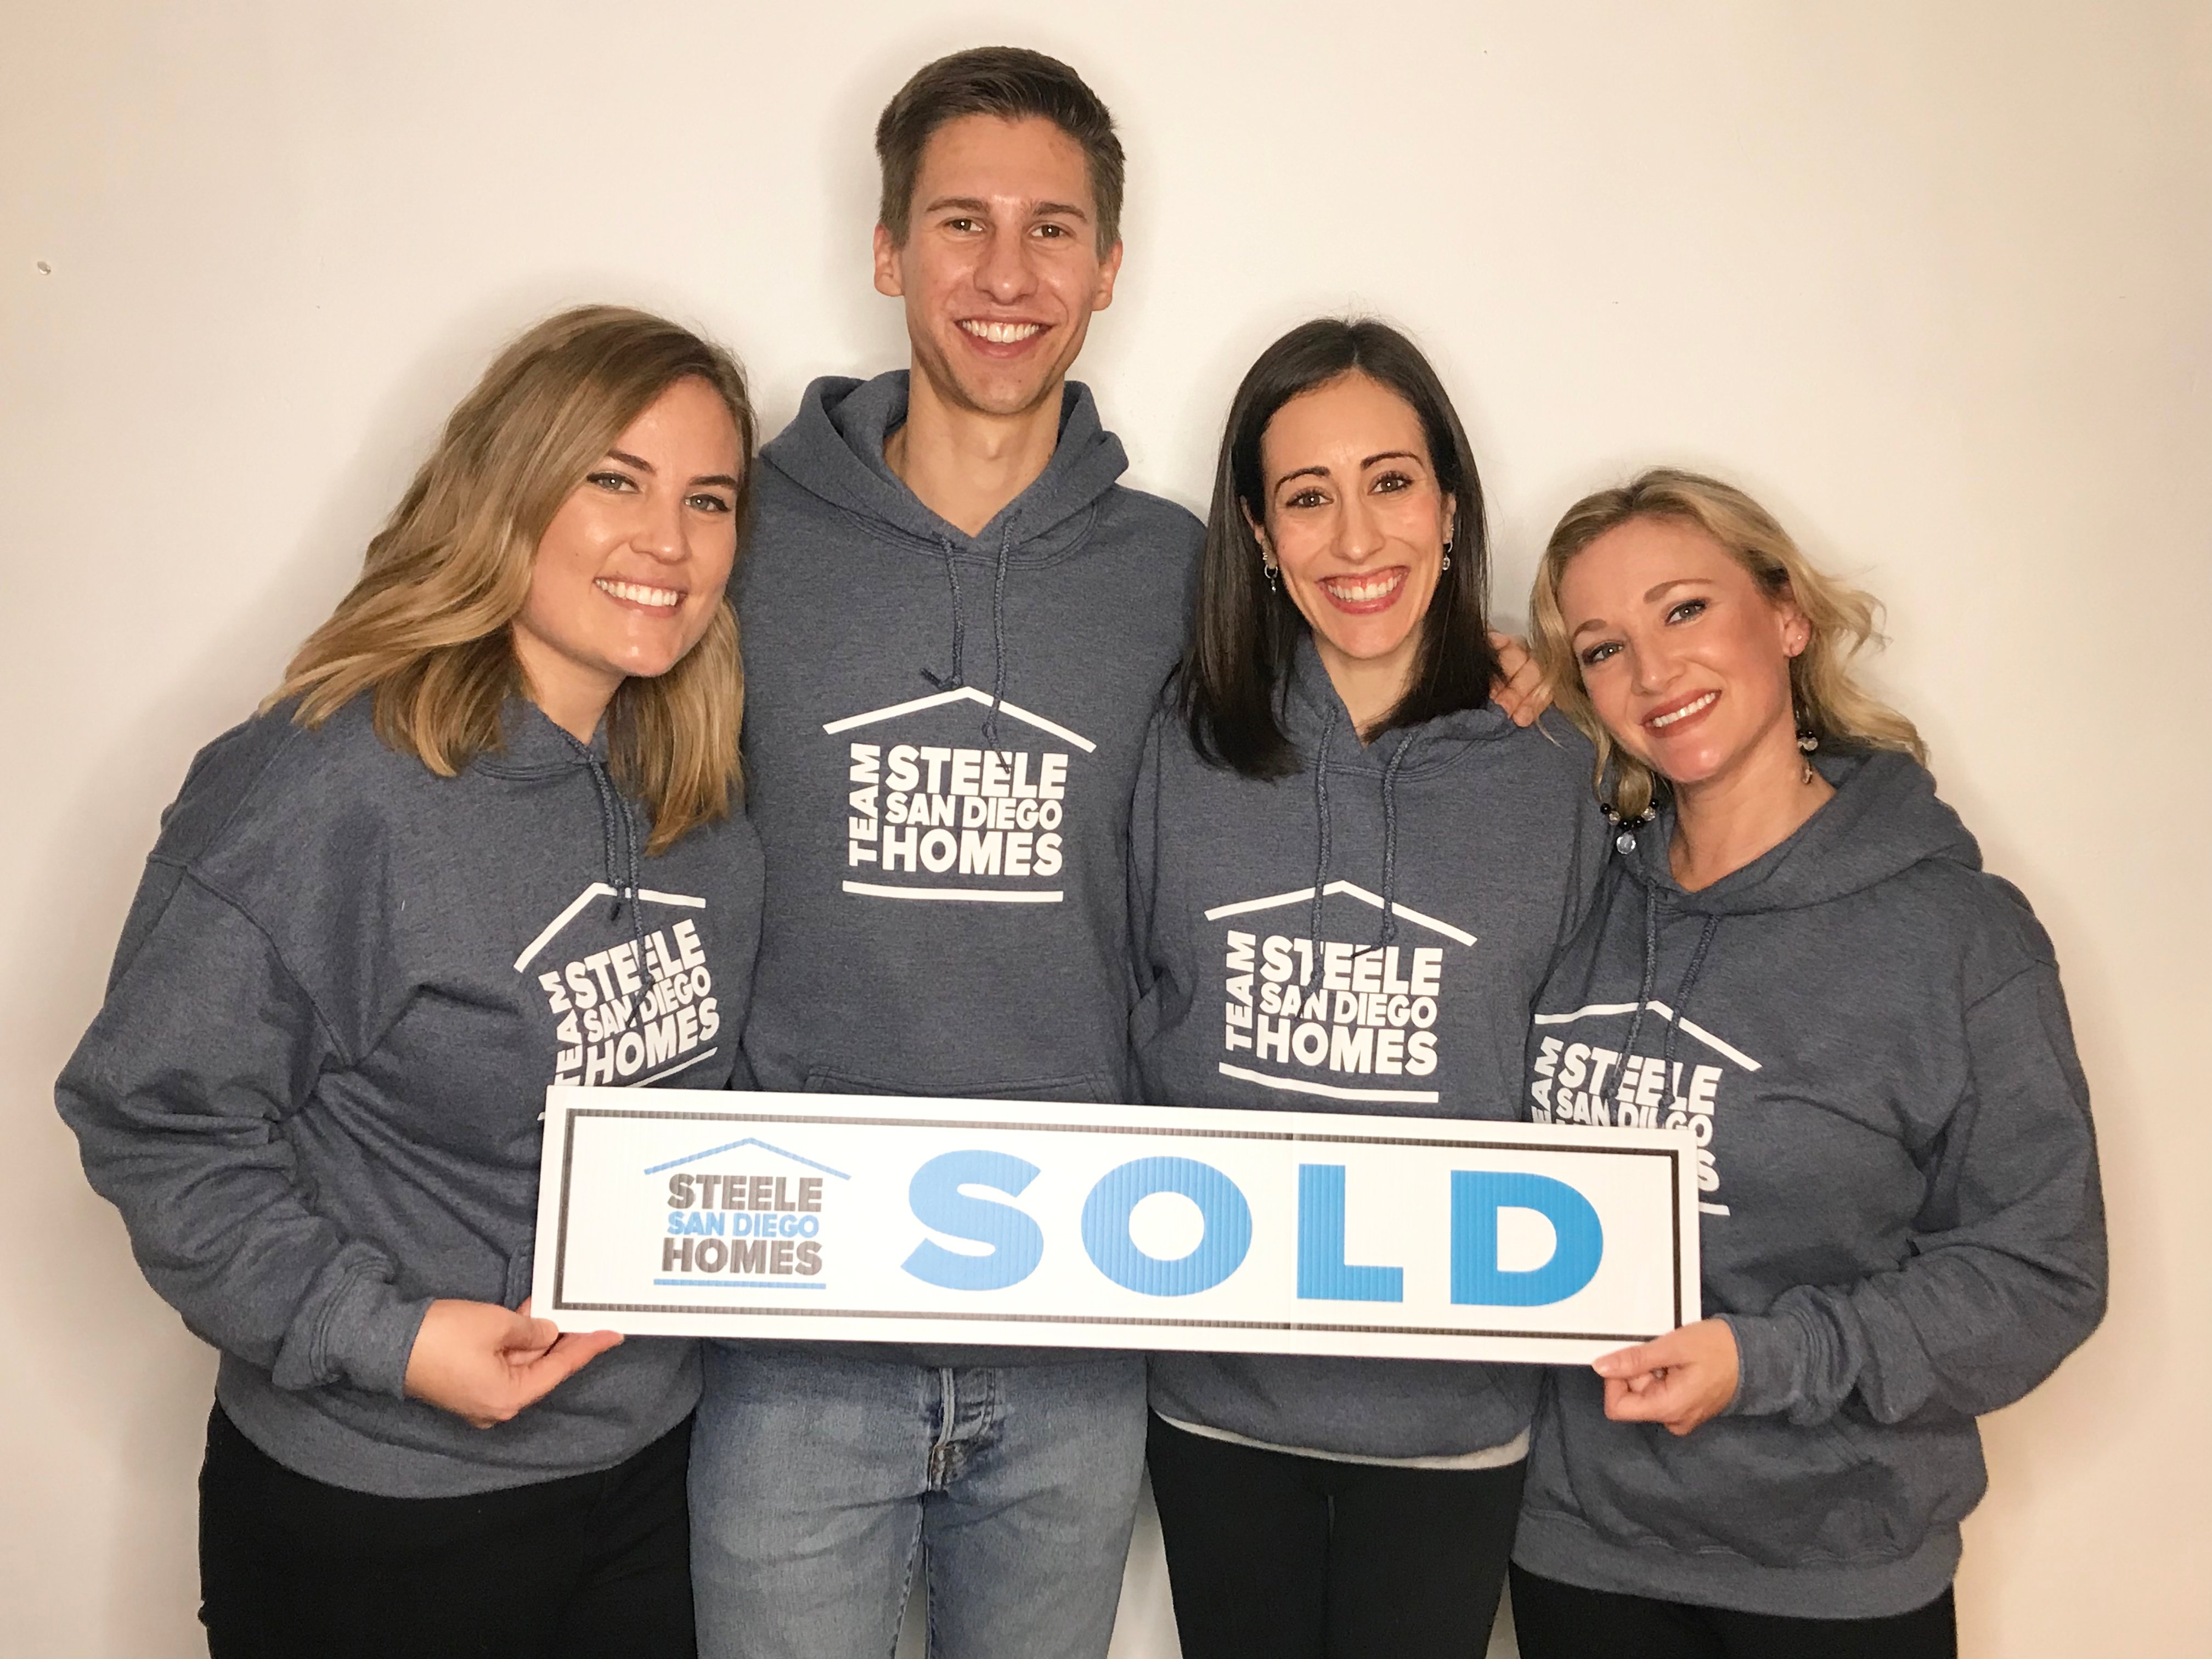 Team Steele San Diego Homes holding a SOLD sign